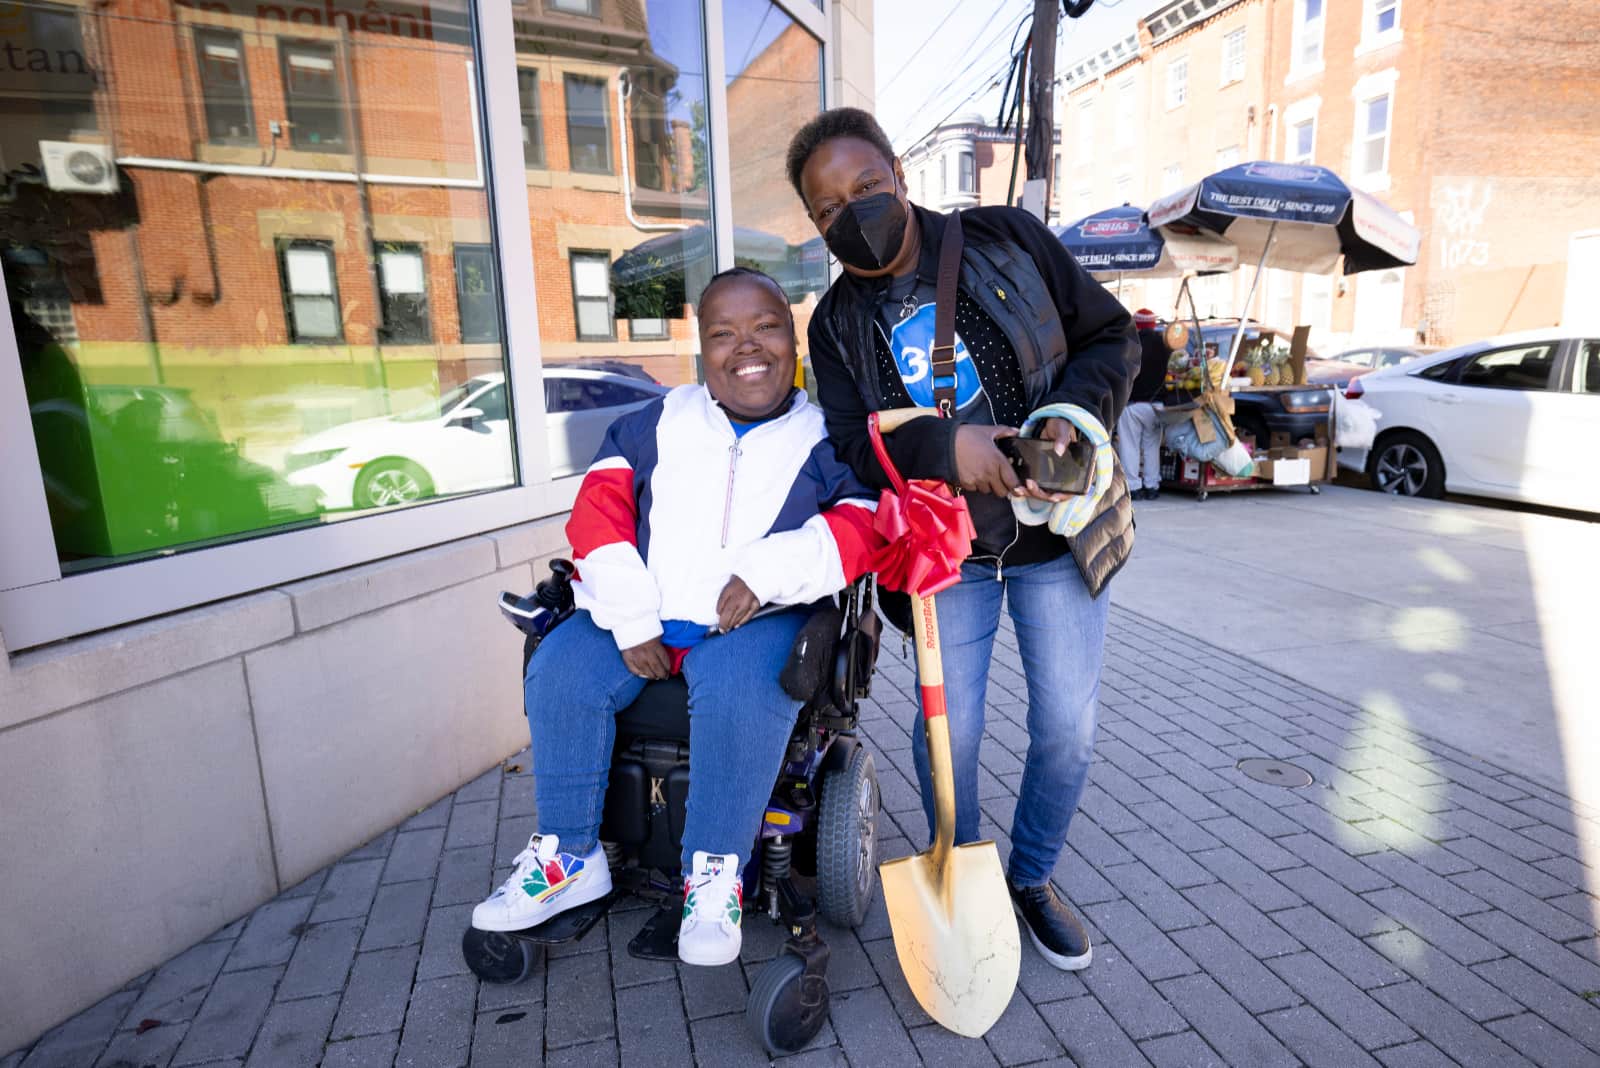 LaToya, on the sidewalk in Philadelphia, poses with a woman, a gold shovel with a red bow balanced between them